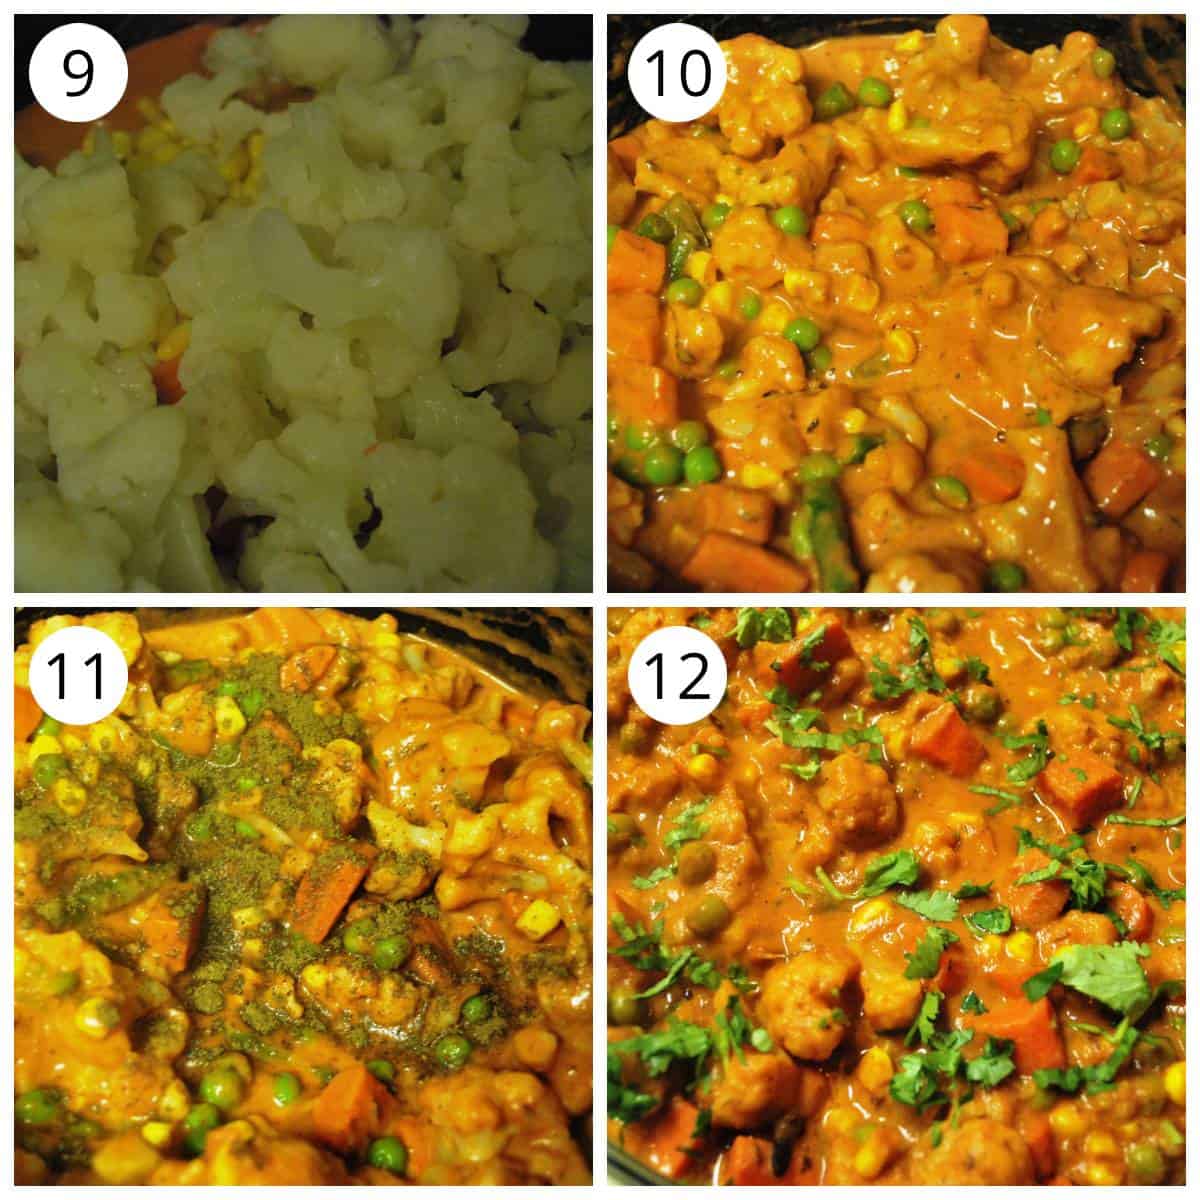 Add vegetables to the mix veg curry